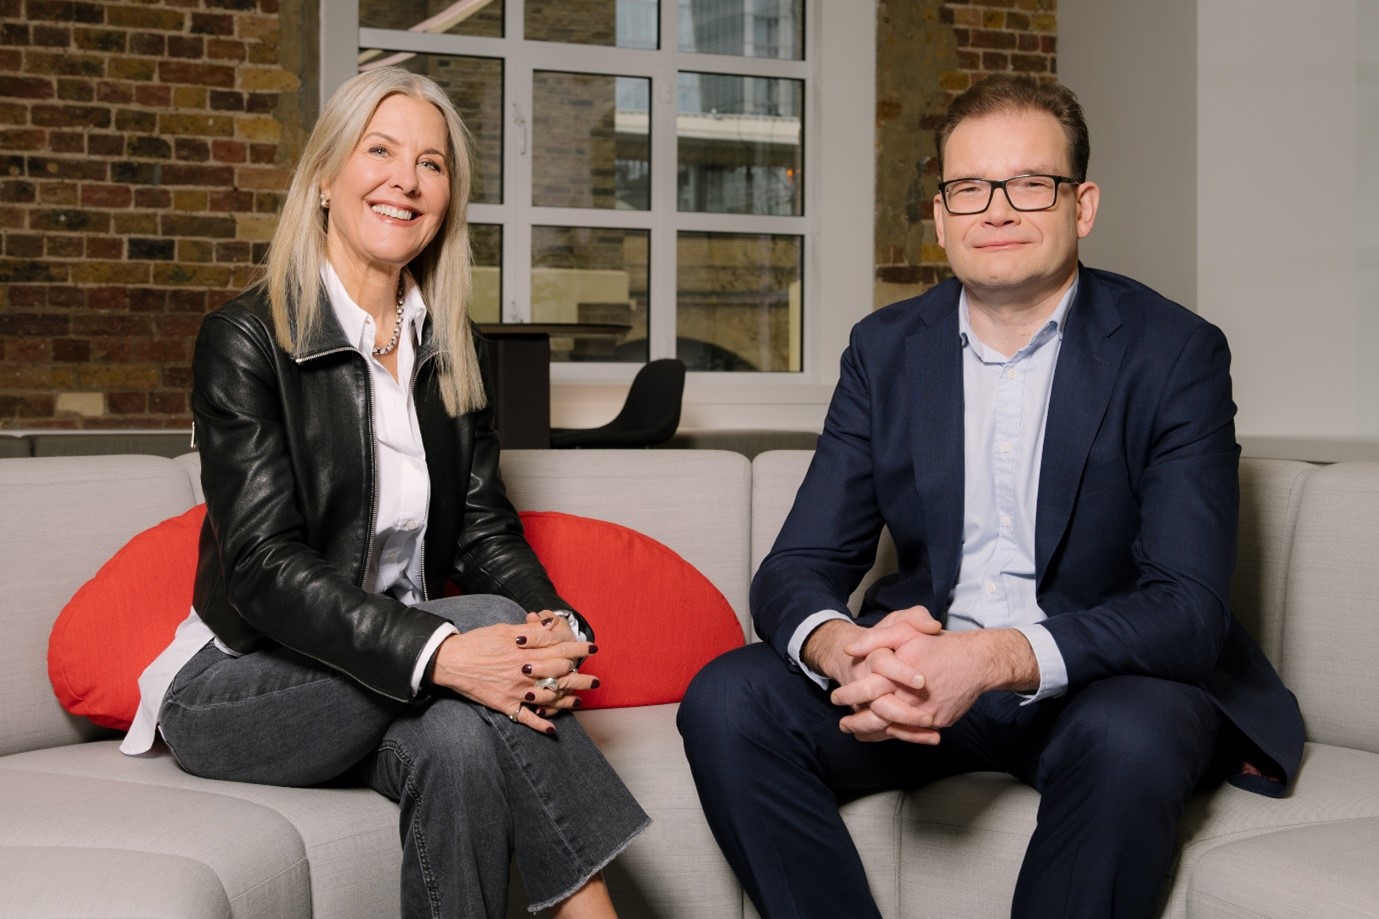 CEO Andrea Czapary Martin and CIO Mark Krajewski sit together at PRS for Music headquarters in London, England. Photo credit @GarryJonesPhotography